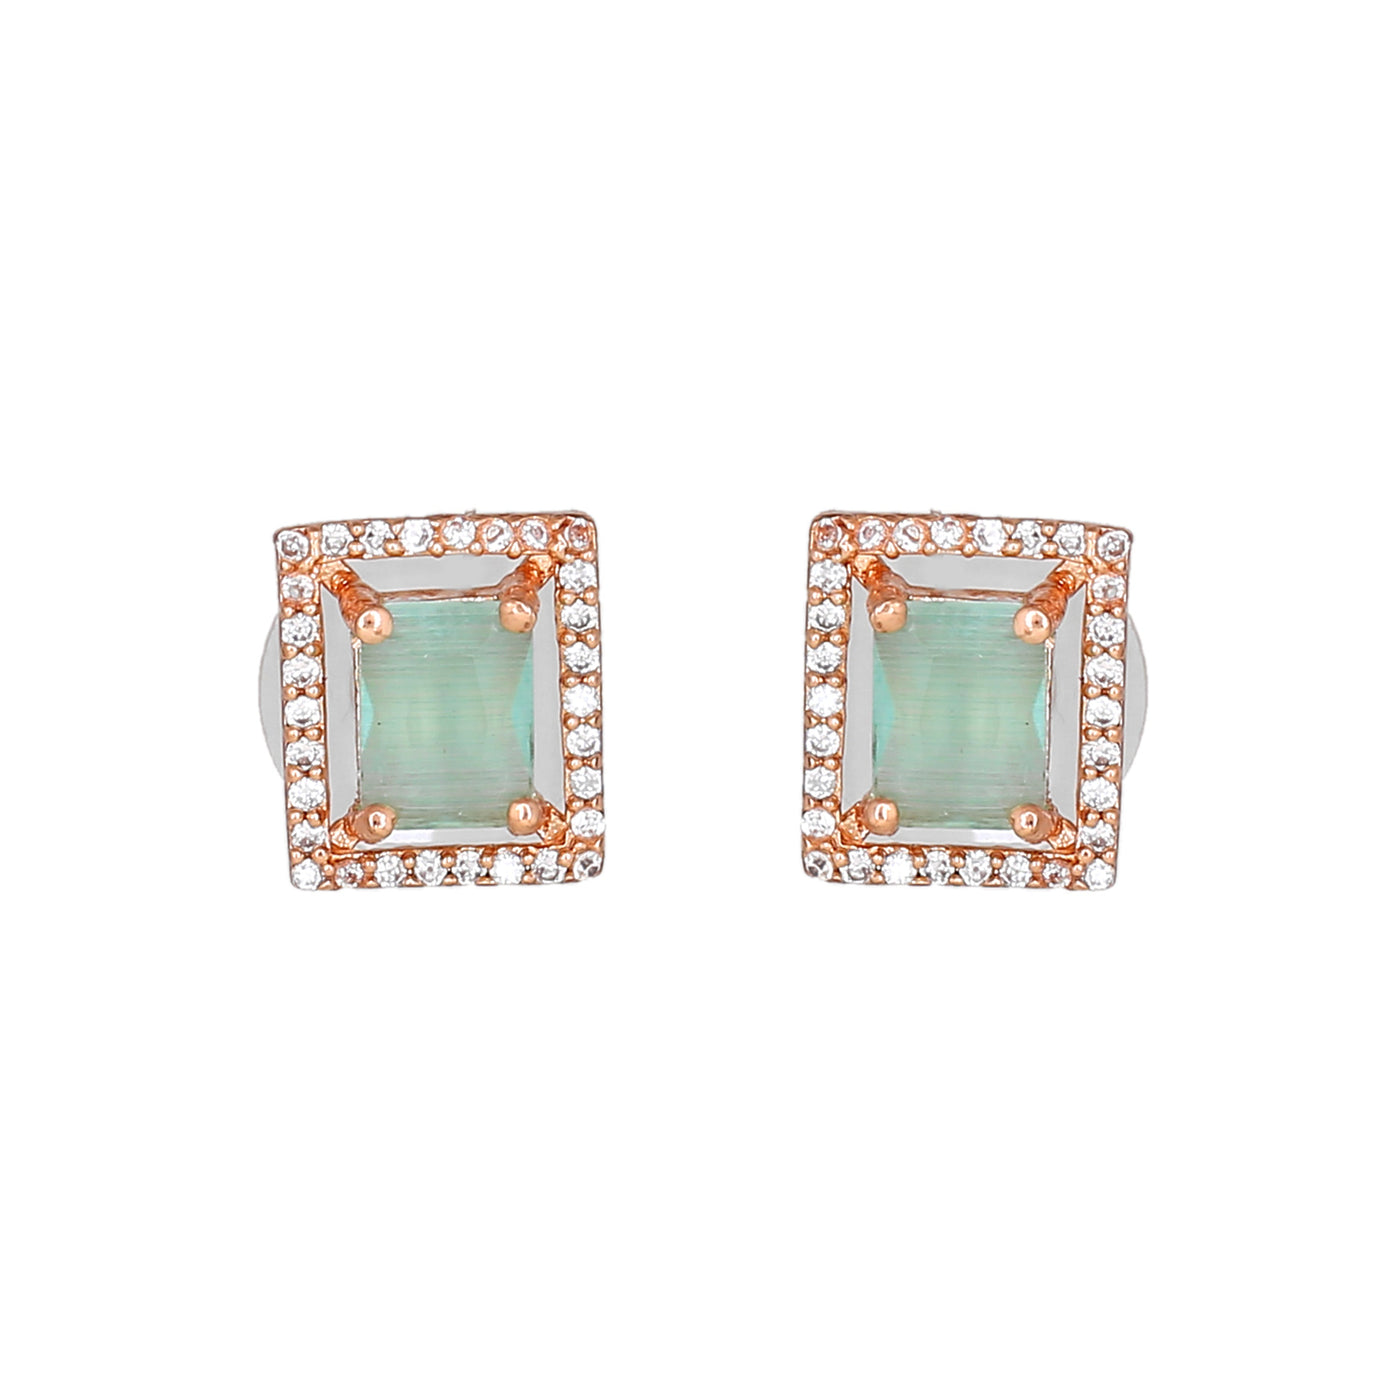 Estele Rose Gold Plated CZ Sparkling Designer Stud Earrings with Mint Green Crystals for Women